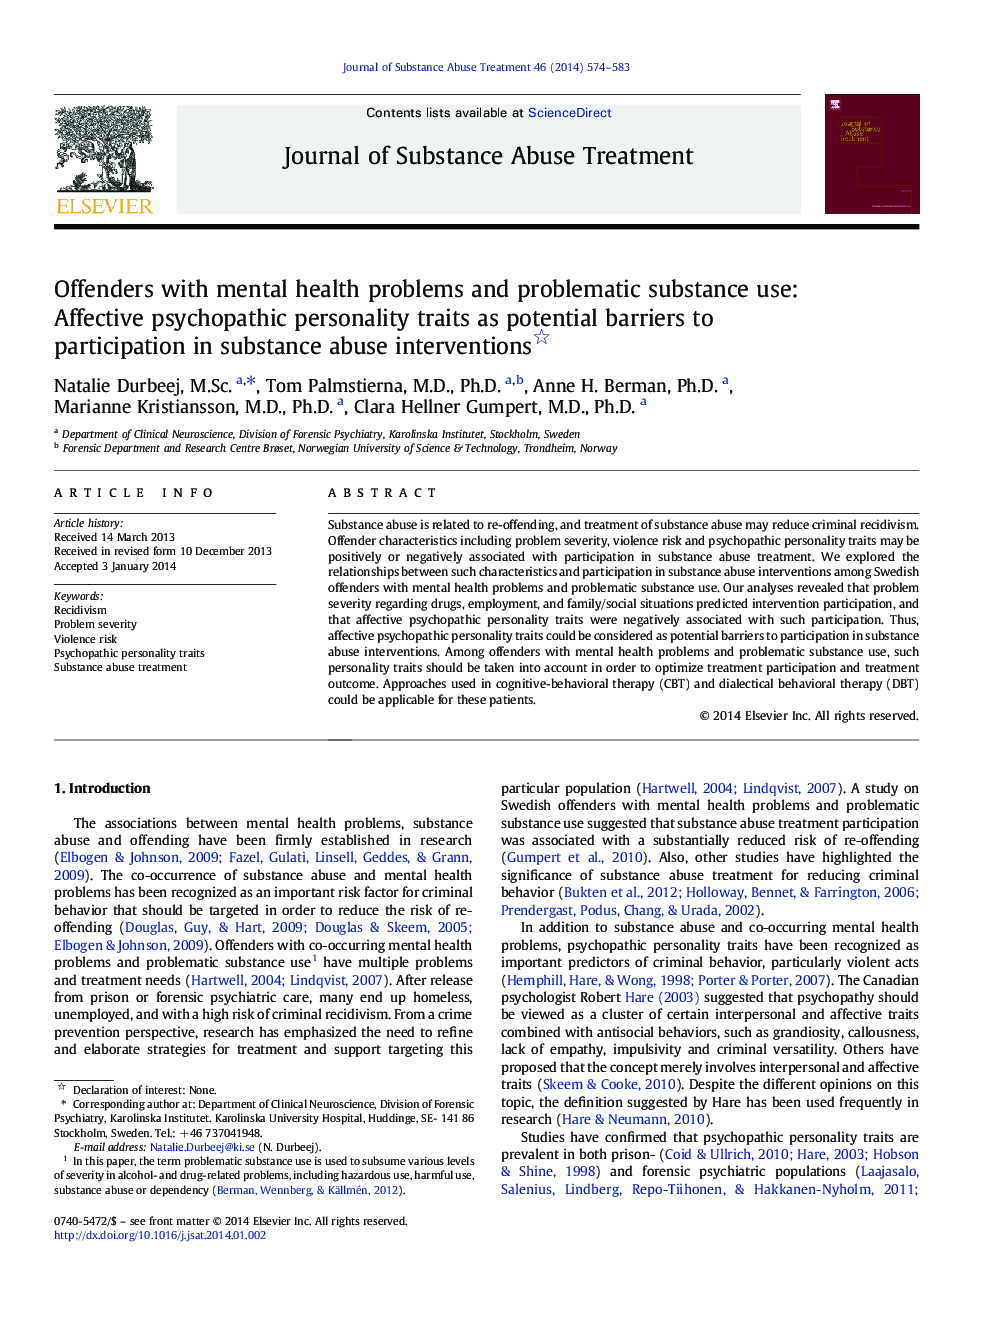 Offenders with mental health problems and problematic substance use: Affective psychopathic personality traits as potential barriers to participation in substance abuse interventions 